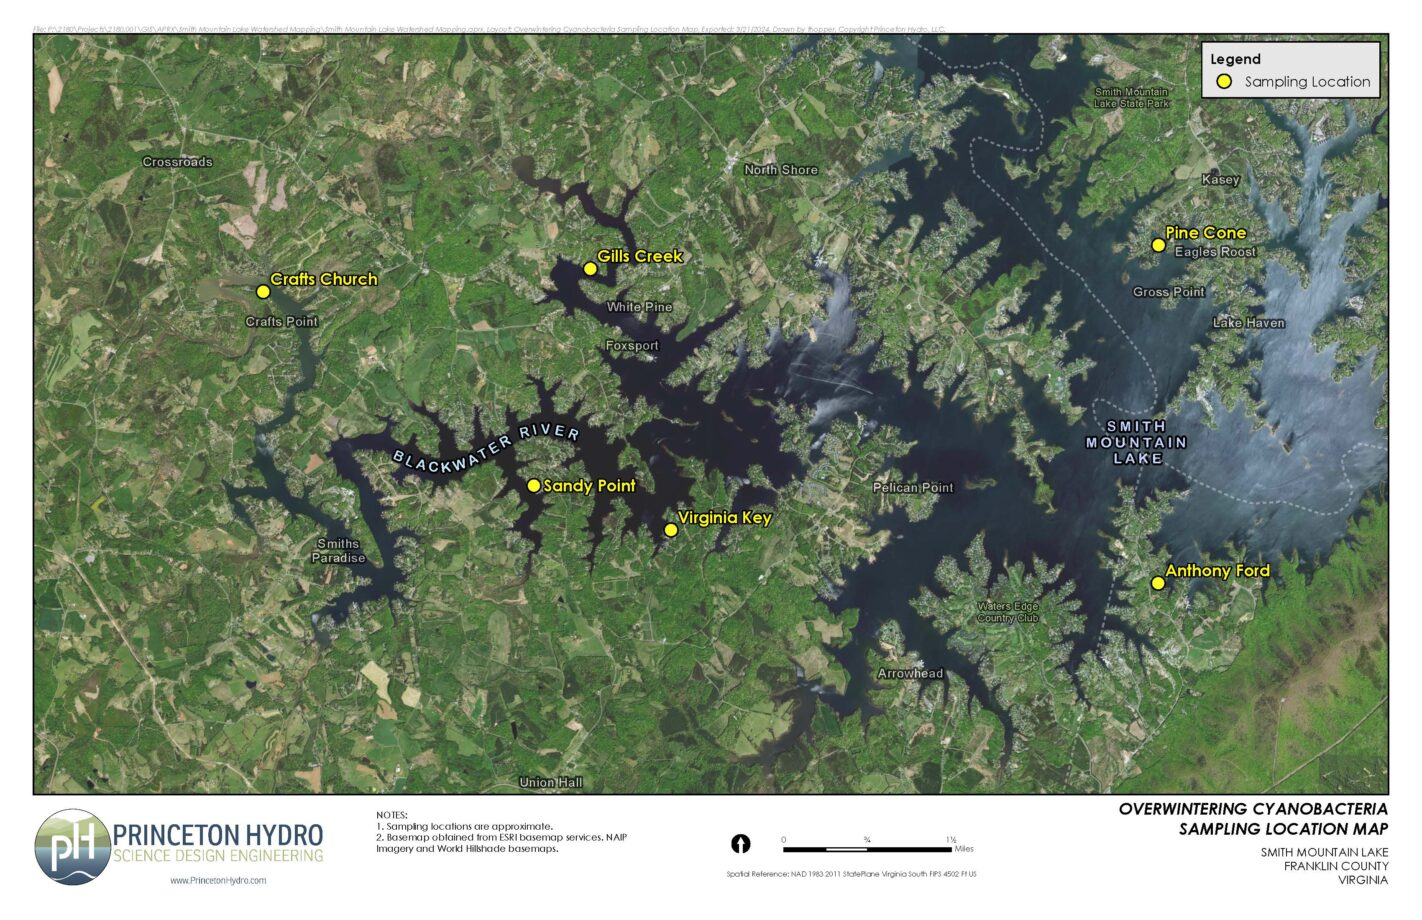 This map identifies the locations of each of the six sampling sites at Smith Mountain Lake